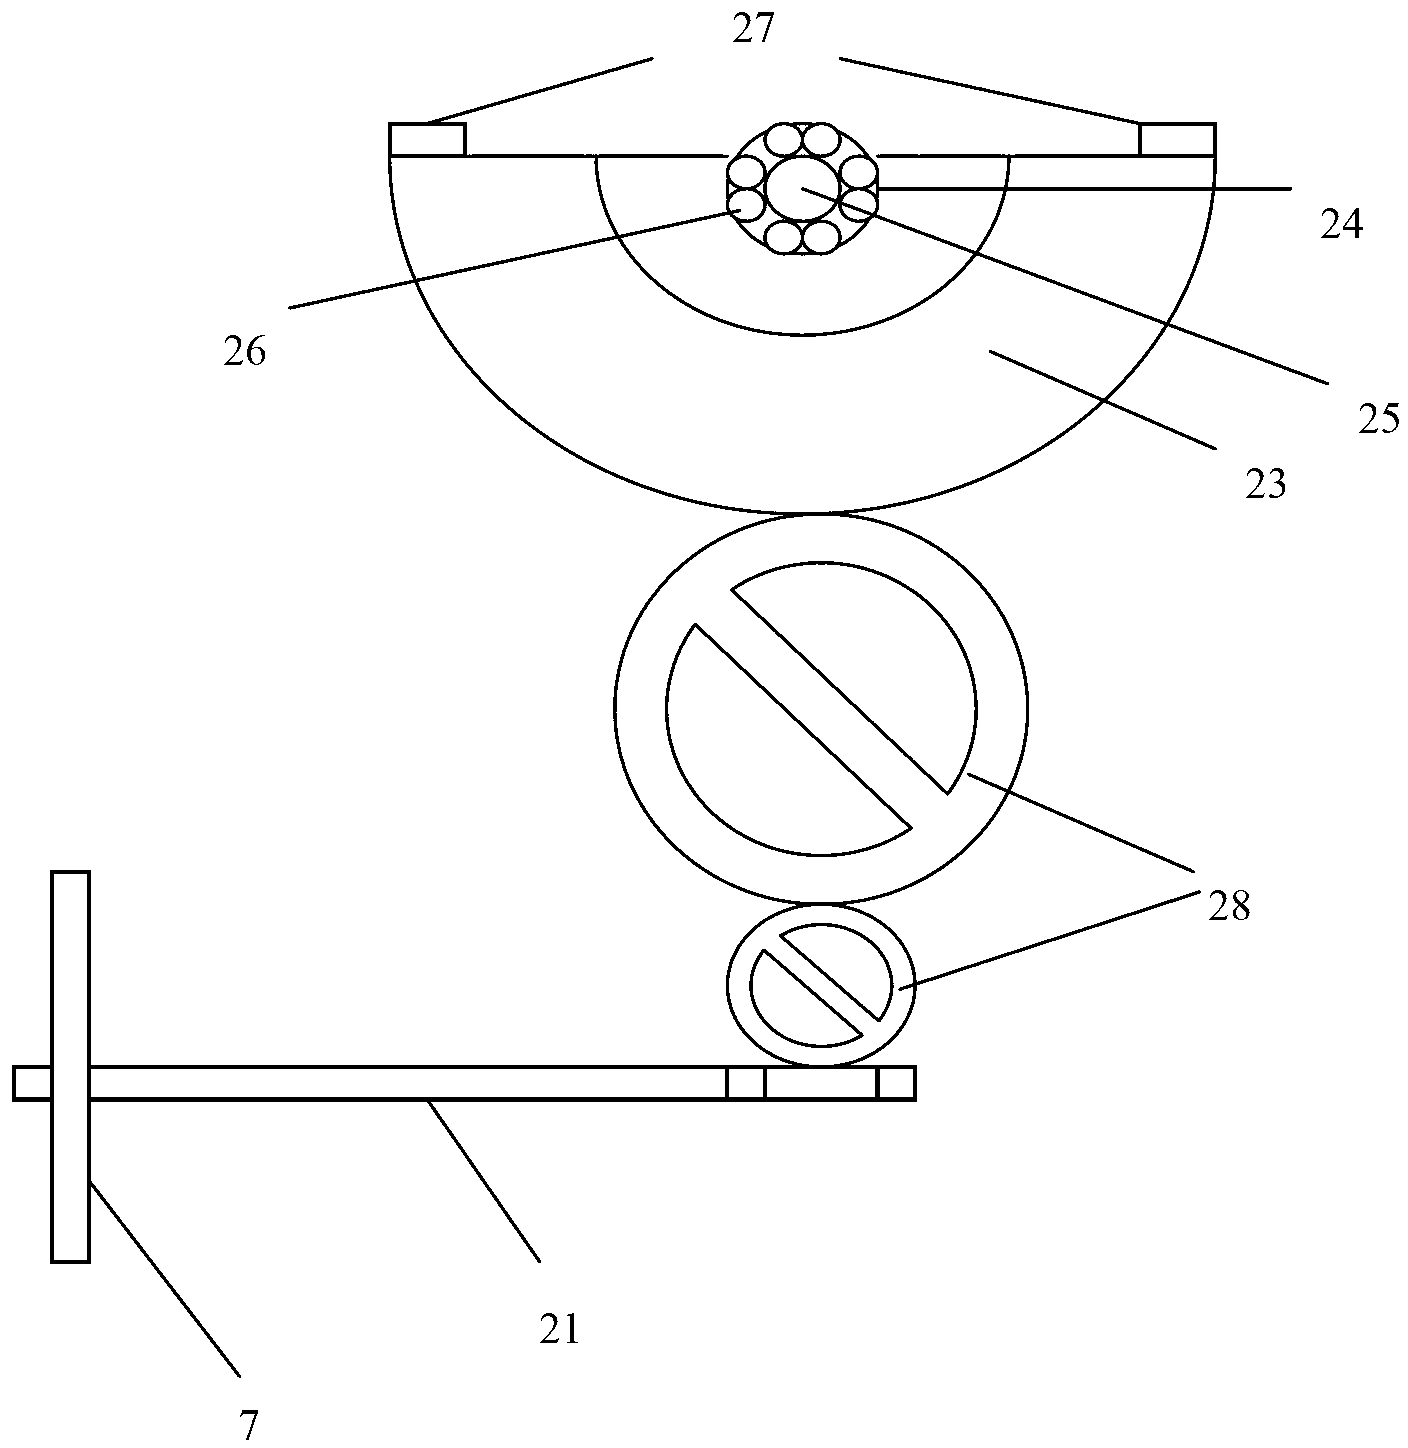 Non-magnetic rotary table used for measuring magnetic moment of satellite